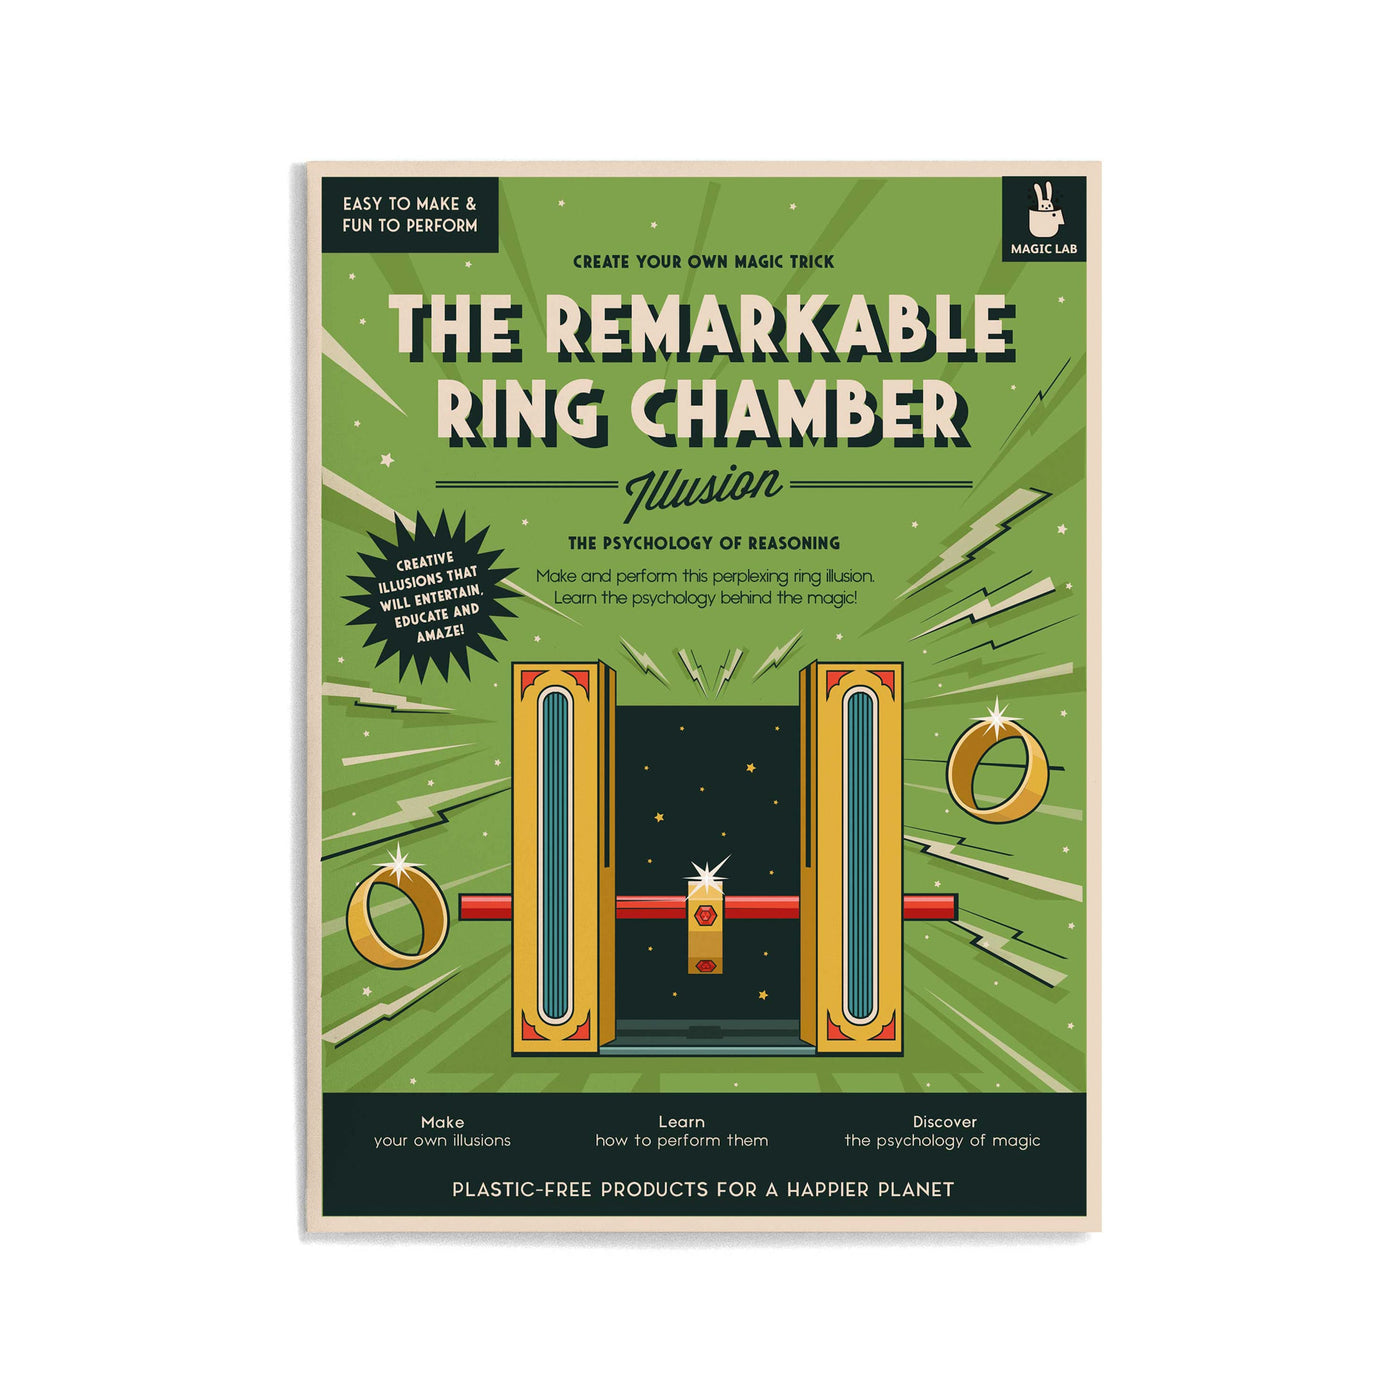 The Remarkable Ring Chamber Illusion Kit